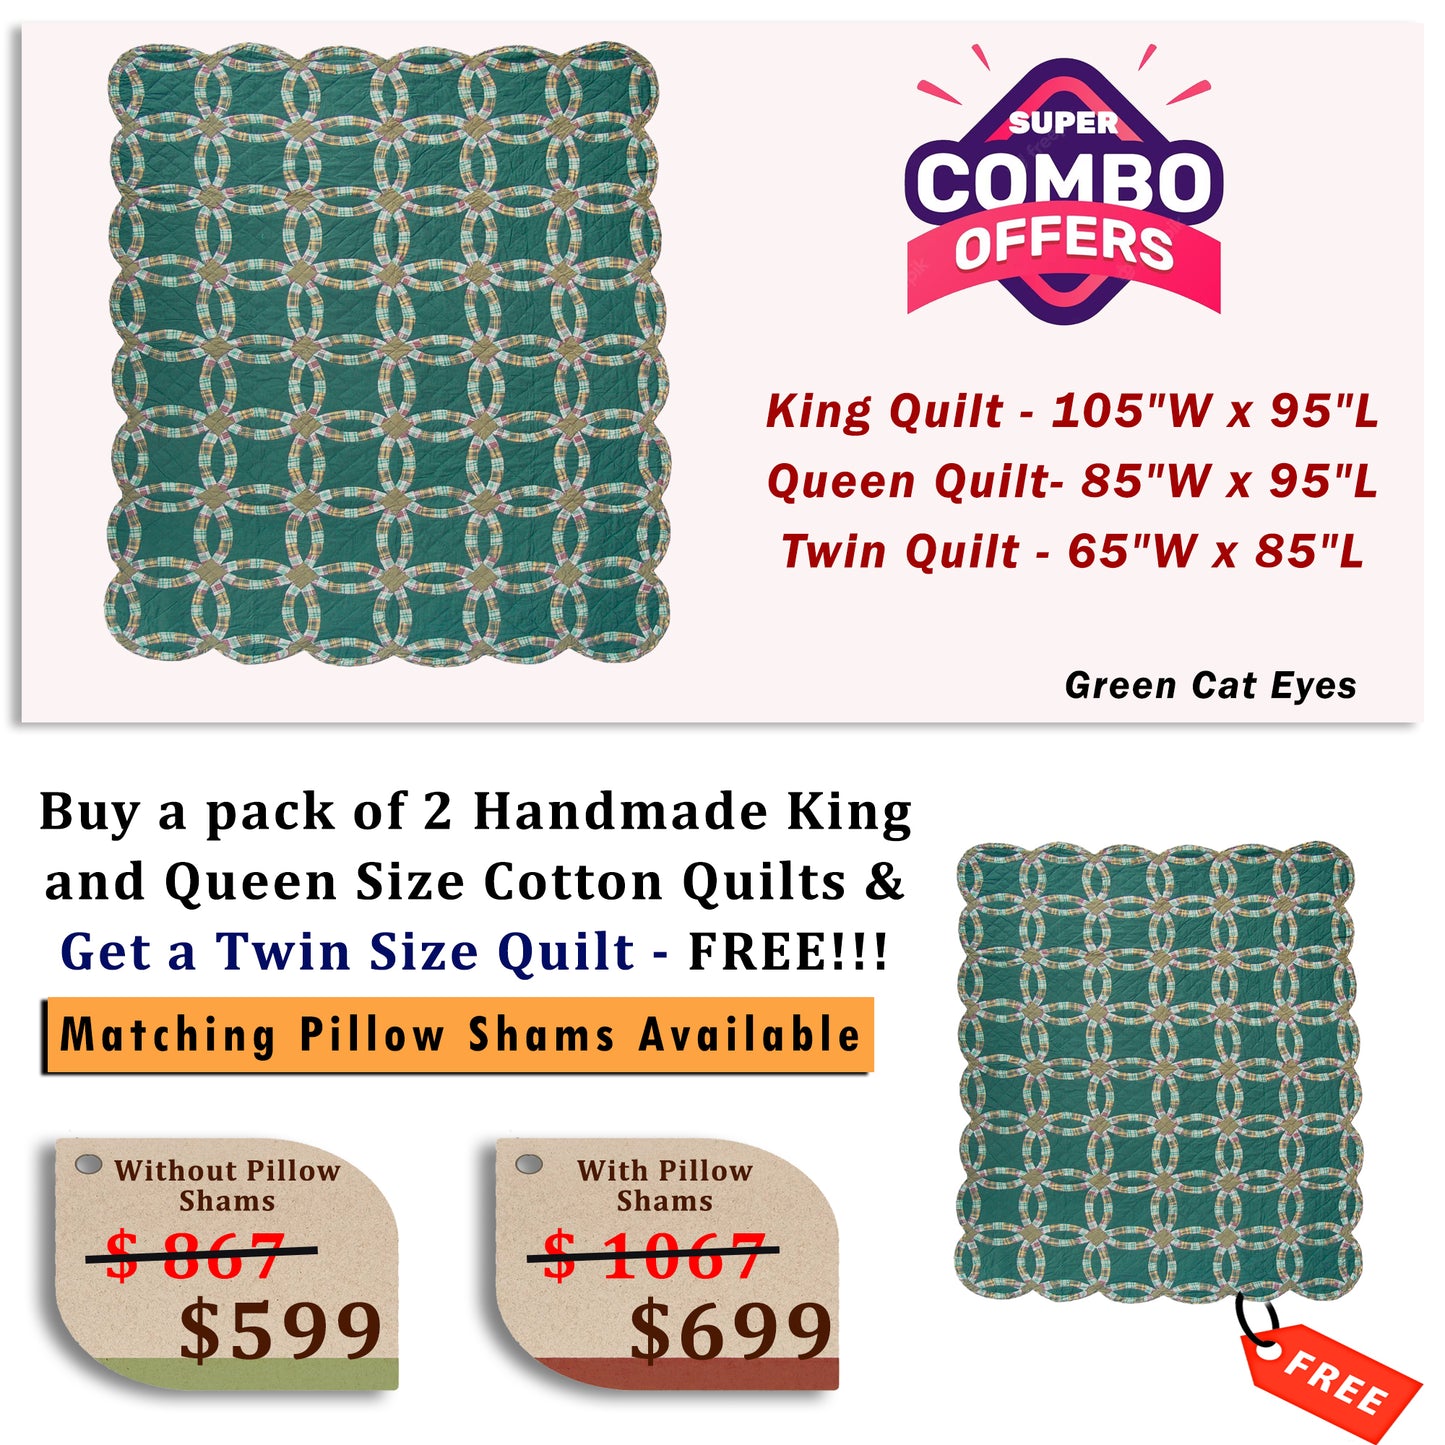 Green Cats Eye - Buy a pack of King and Queen Size Quilt, and get a Twin Size Quilt FREE!!!